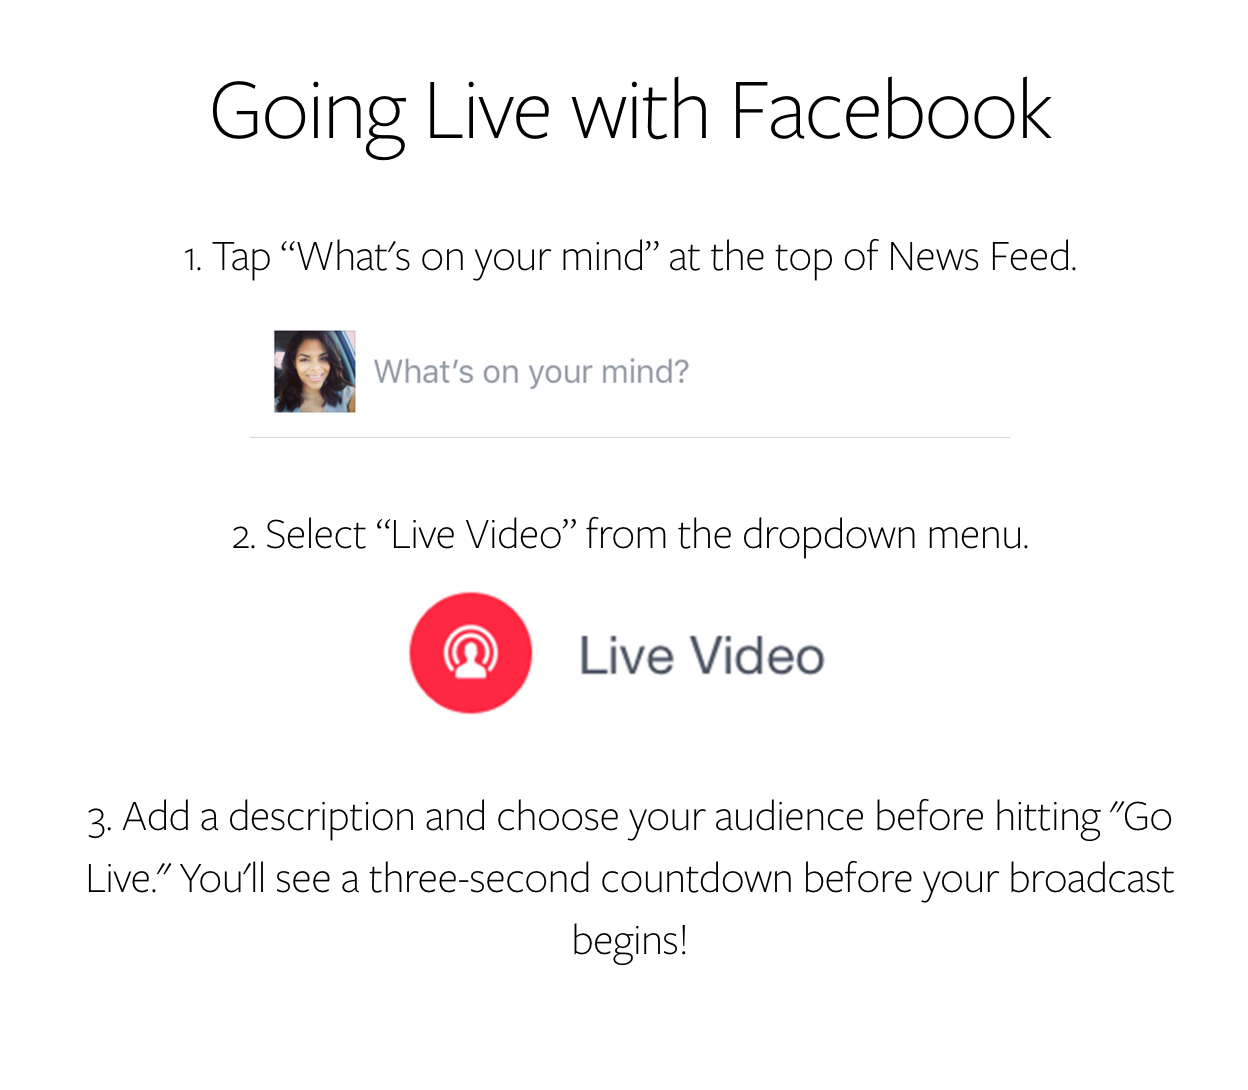 Going Live with Facebook Instructions 